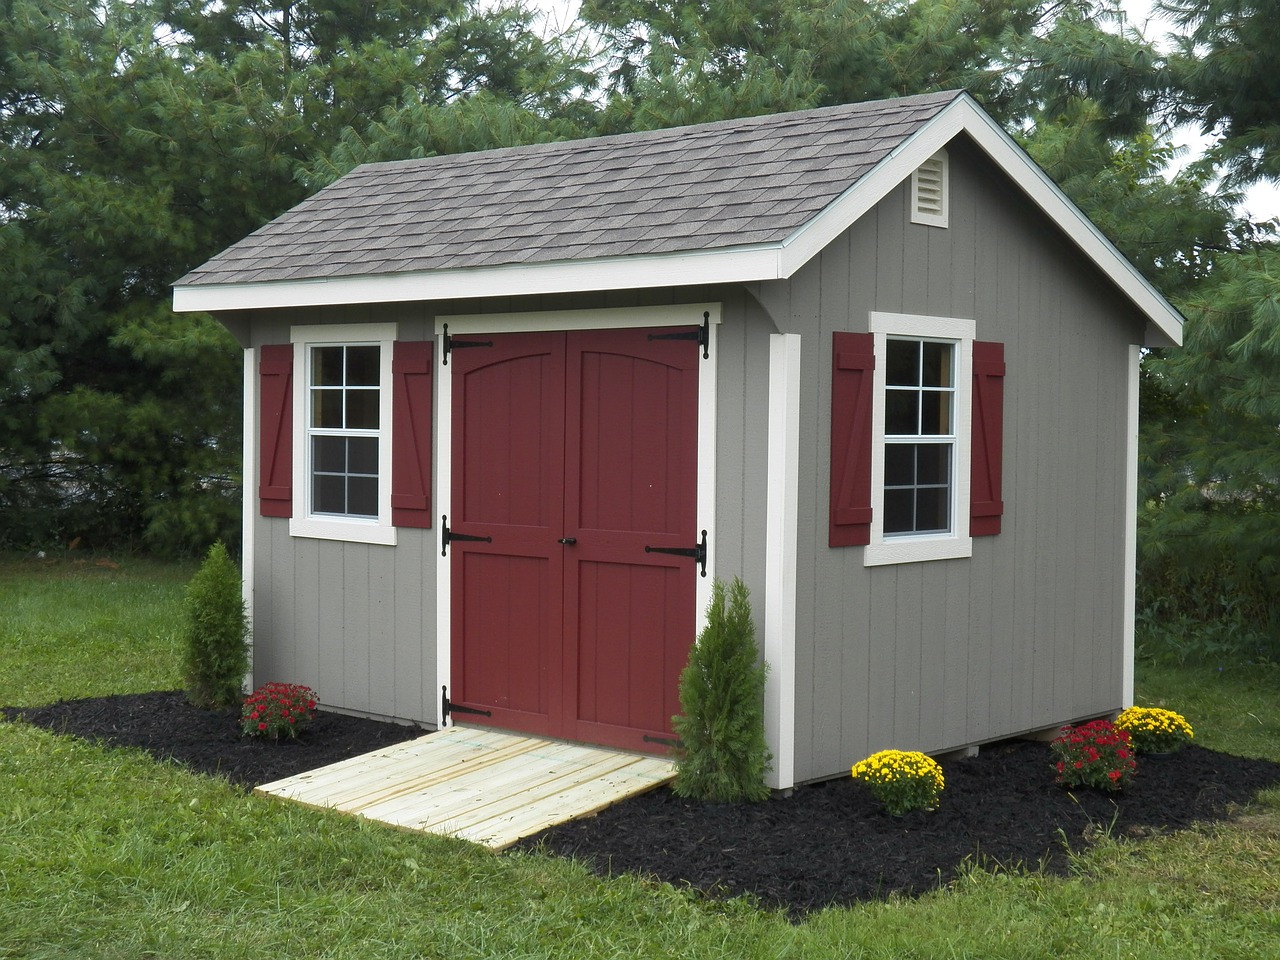 Simple-garden-shed-with-a-blend-of-gray-and-dark-red-exterior-